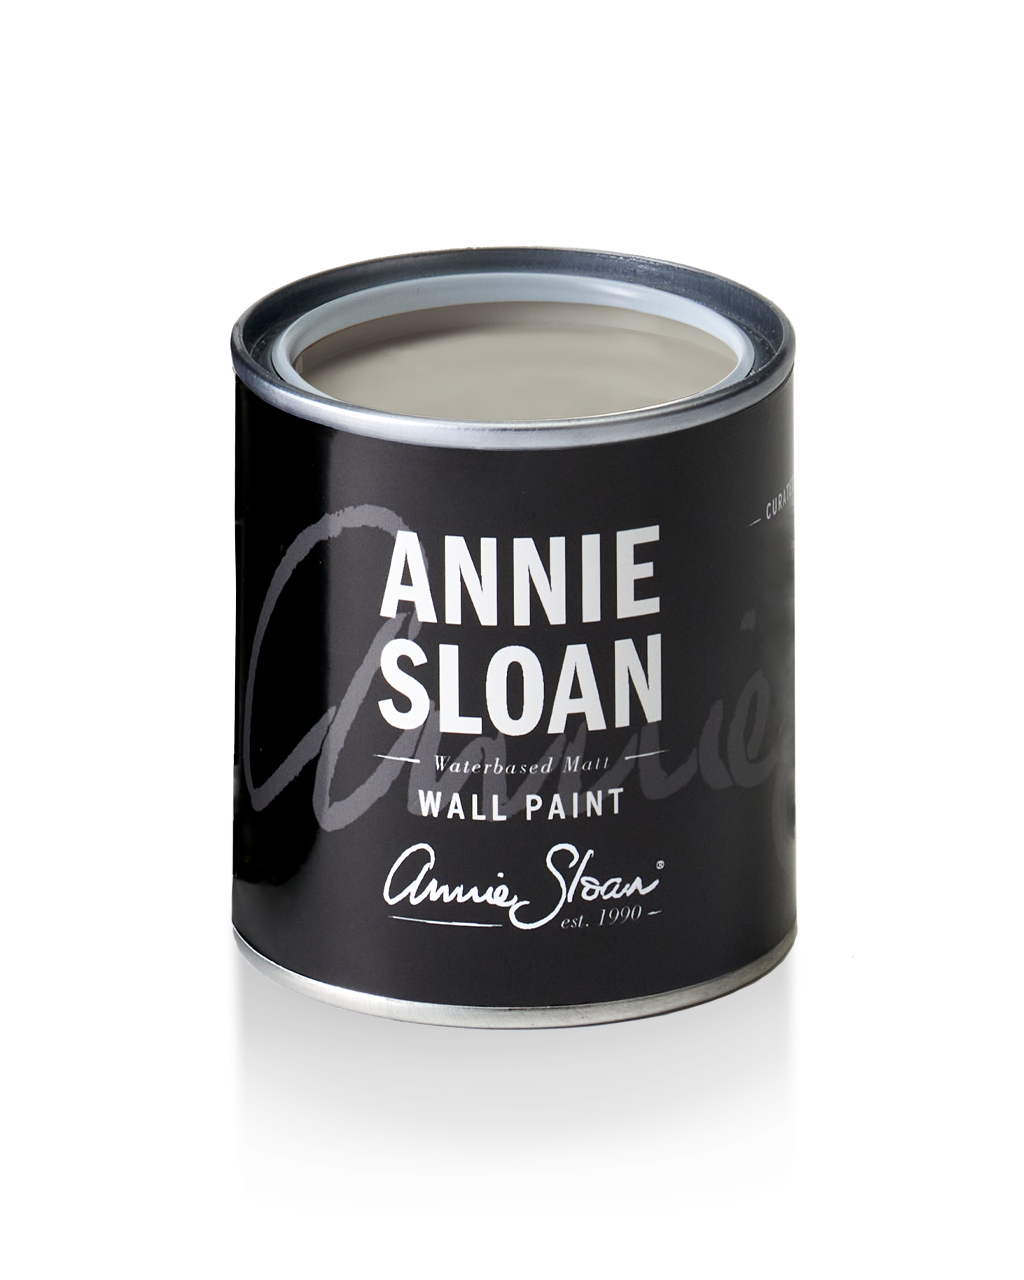 120ml of Paris Grey Wall Paint by Annie Sloan